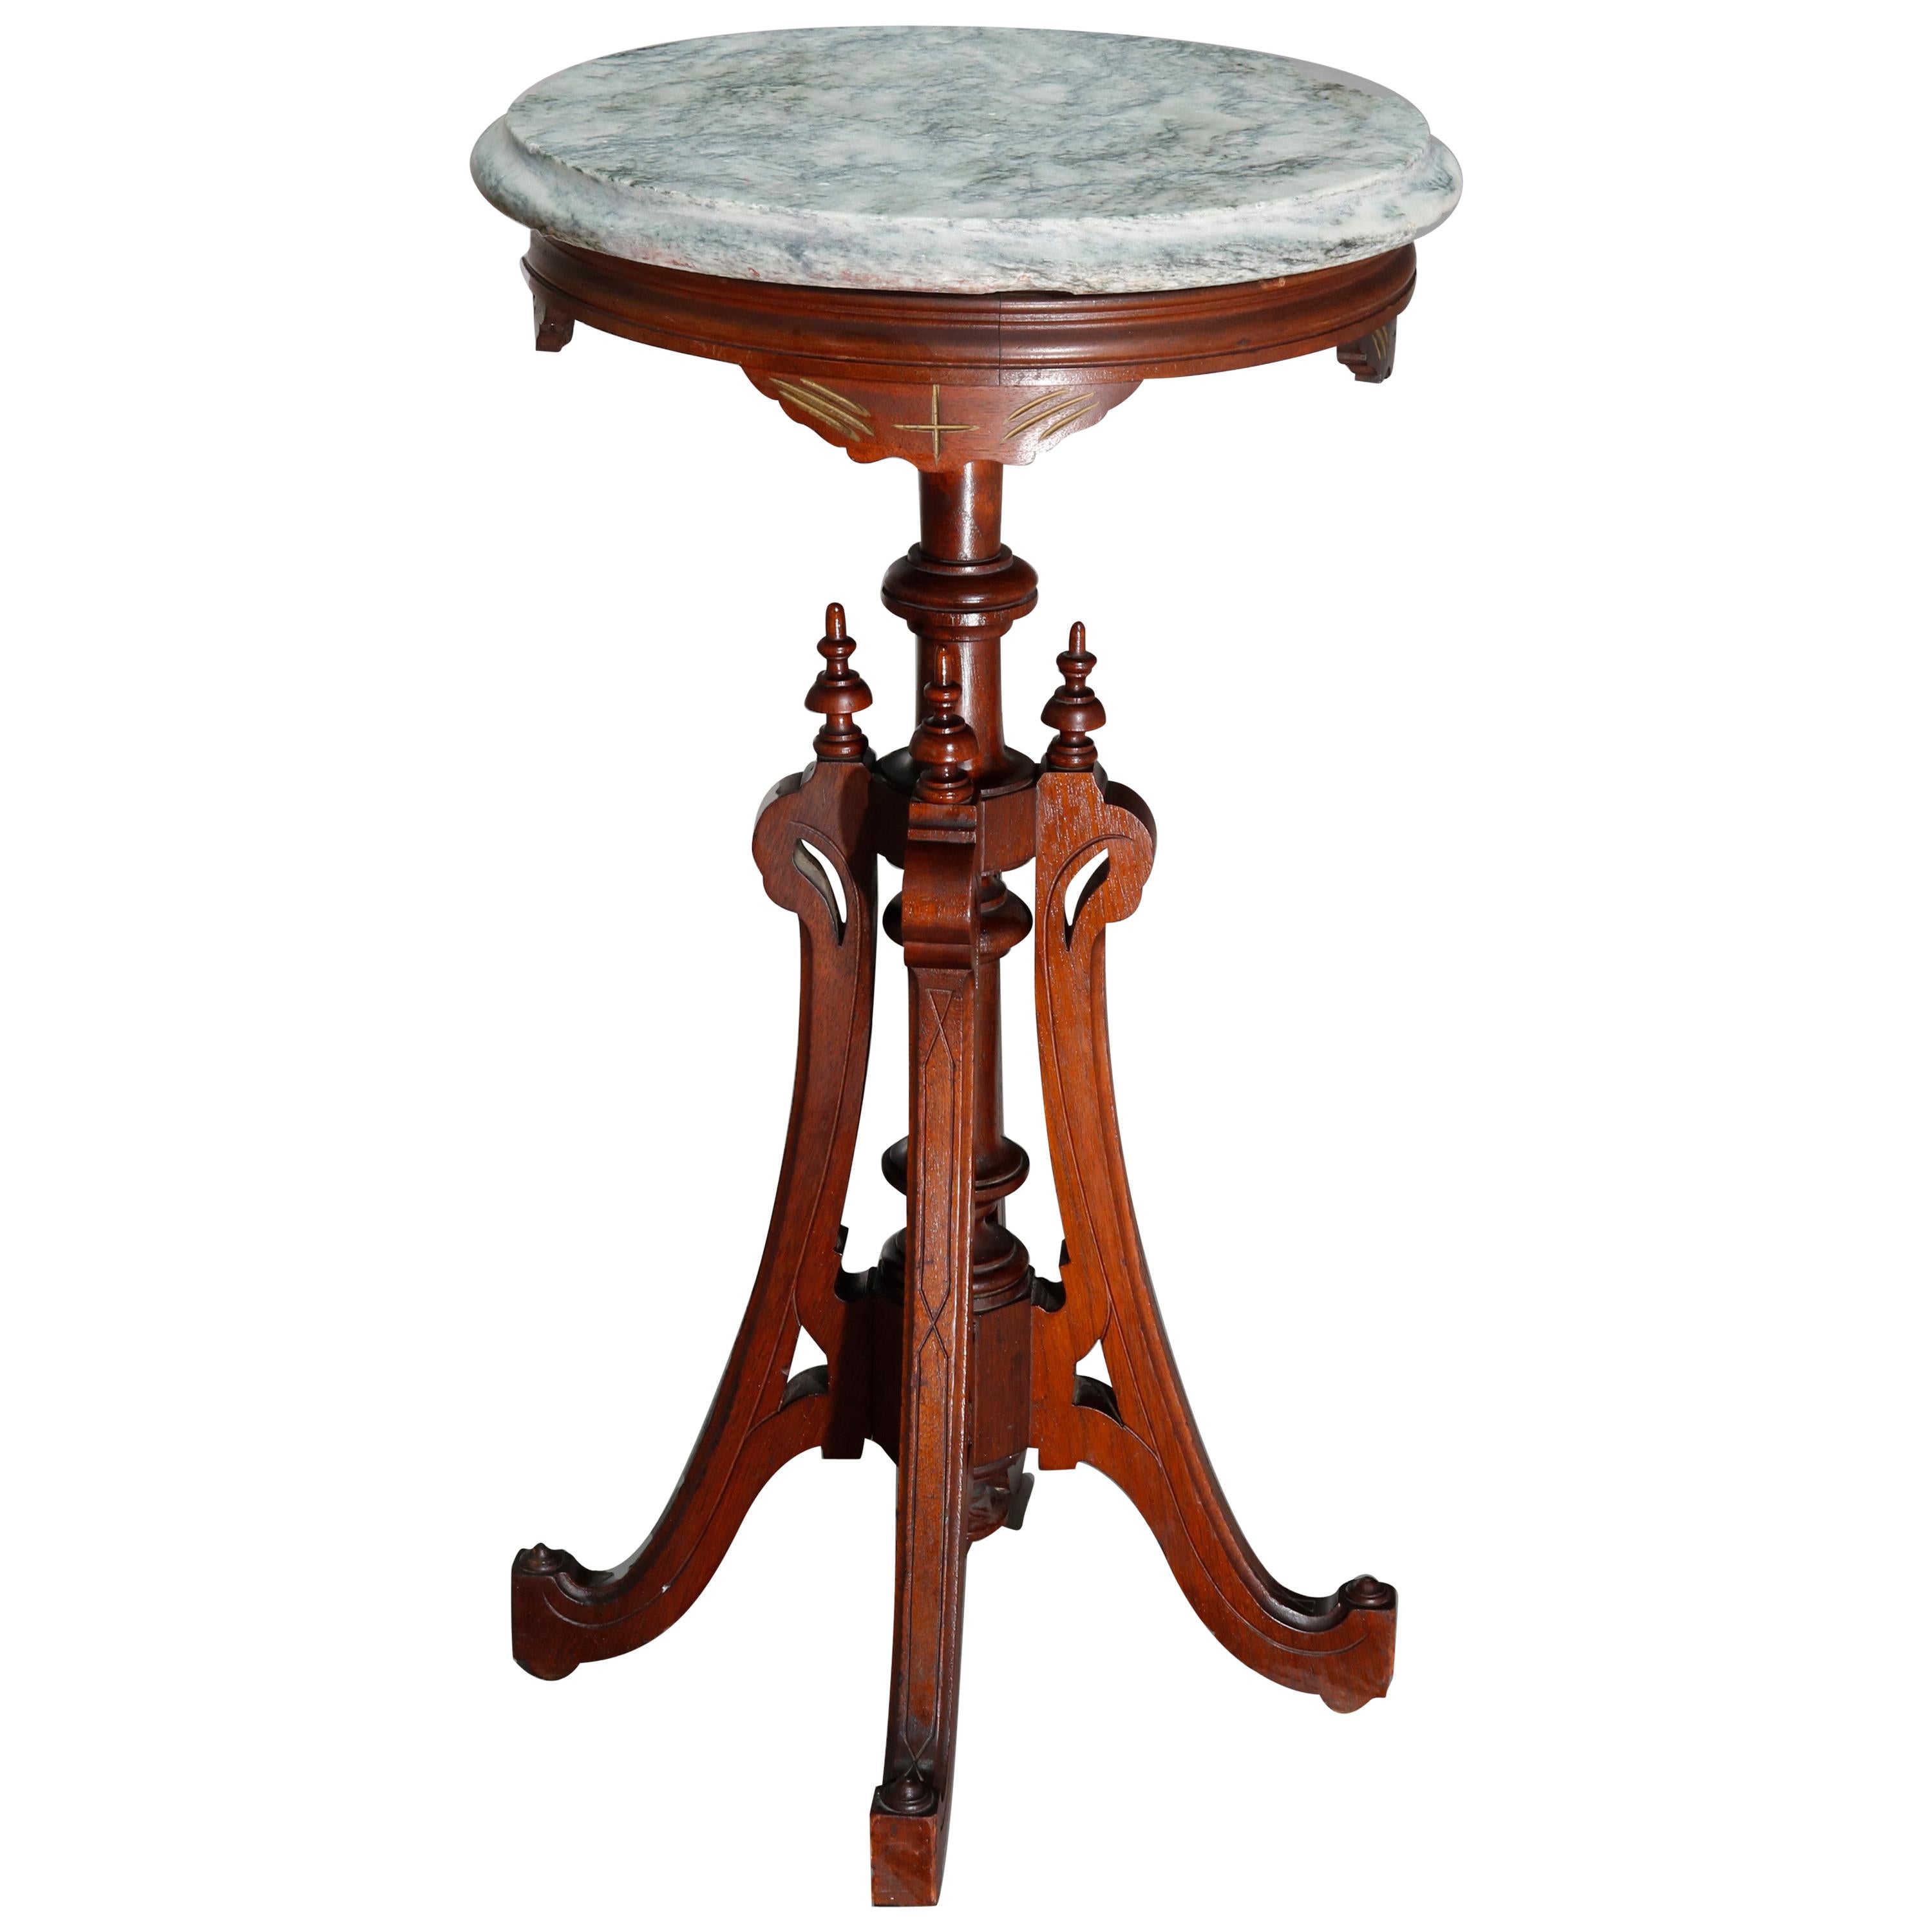 Antique Renaissance Revival Carved Walnut Marble Top Fern Stand, circa 1890